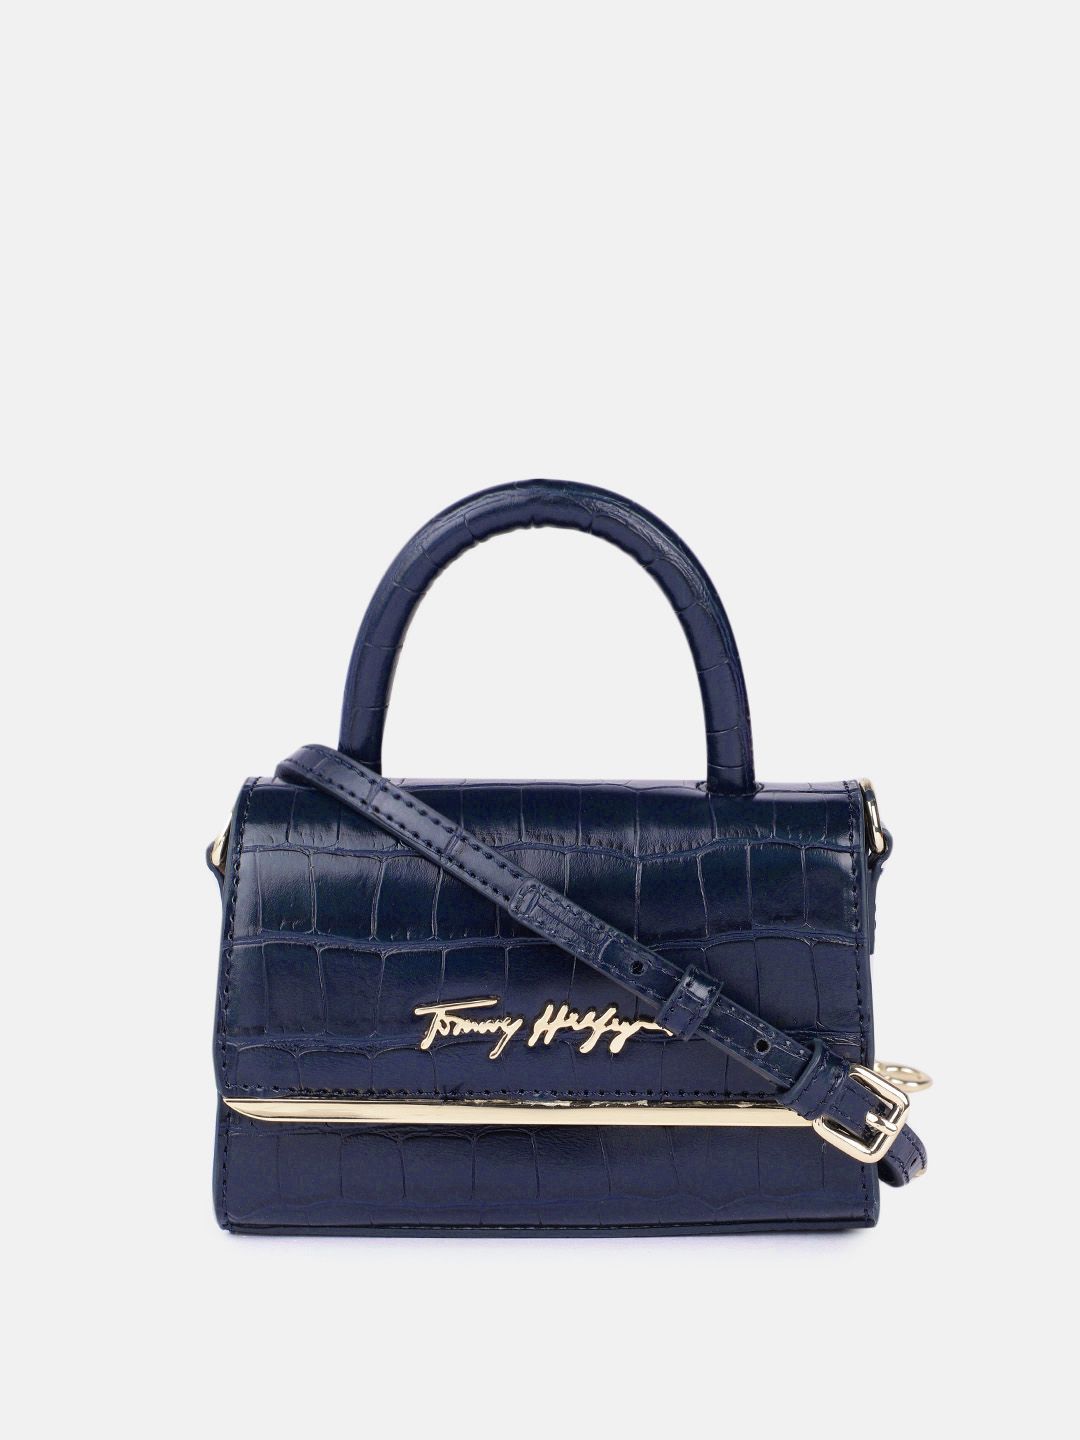 Tommy Hilfiger Navy Blue Animal Textured PU Small Structured Handheld Bag Price in India